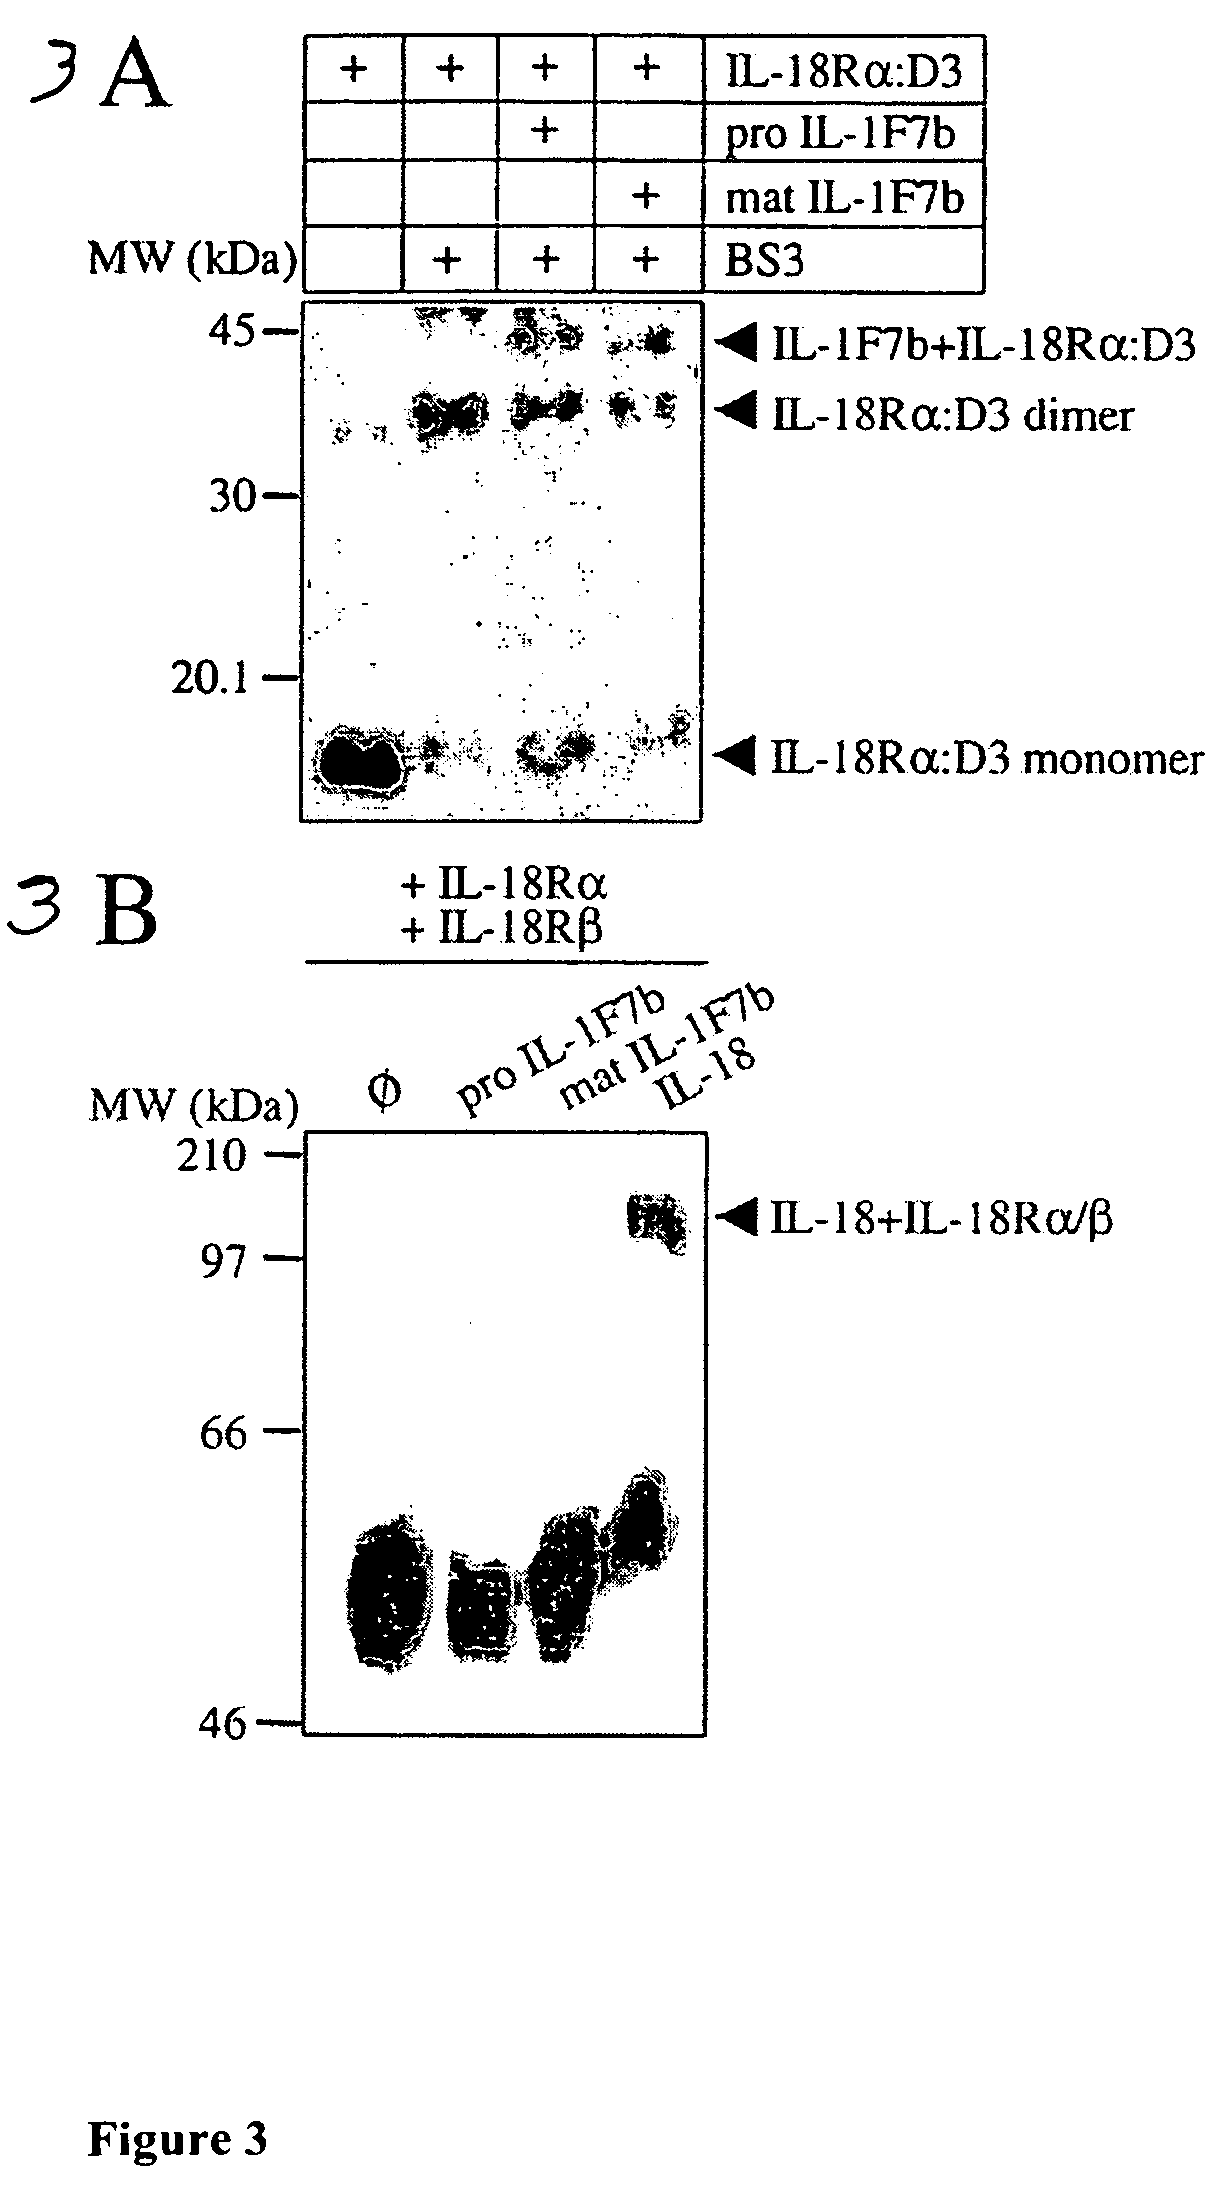 Method of treatment using a cytokine able to bind IL-18BP to inhibit the activity of a second cytokine